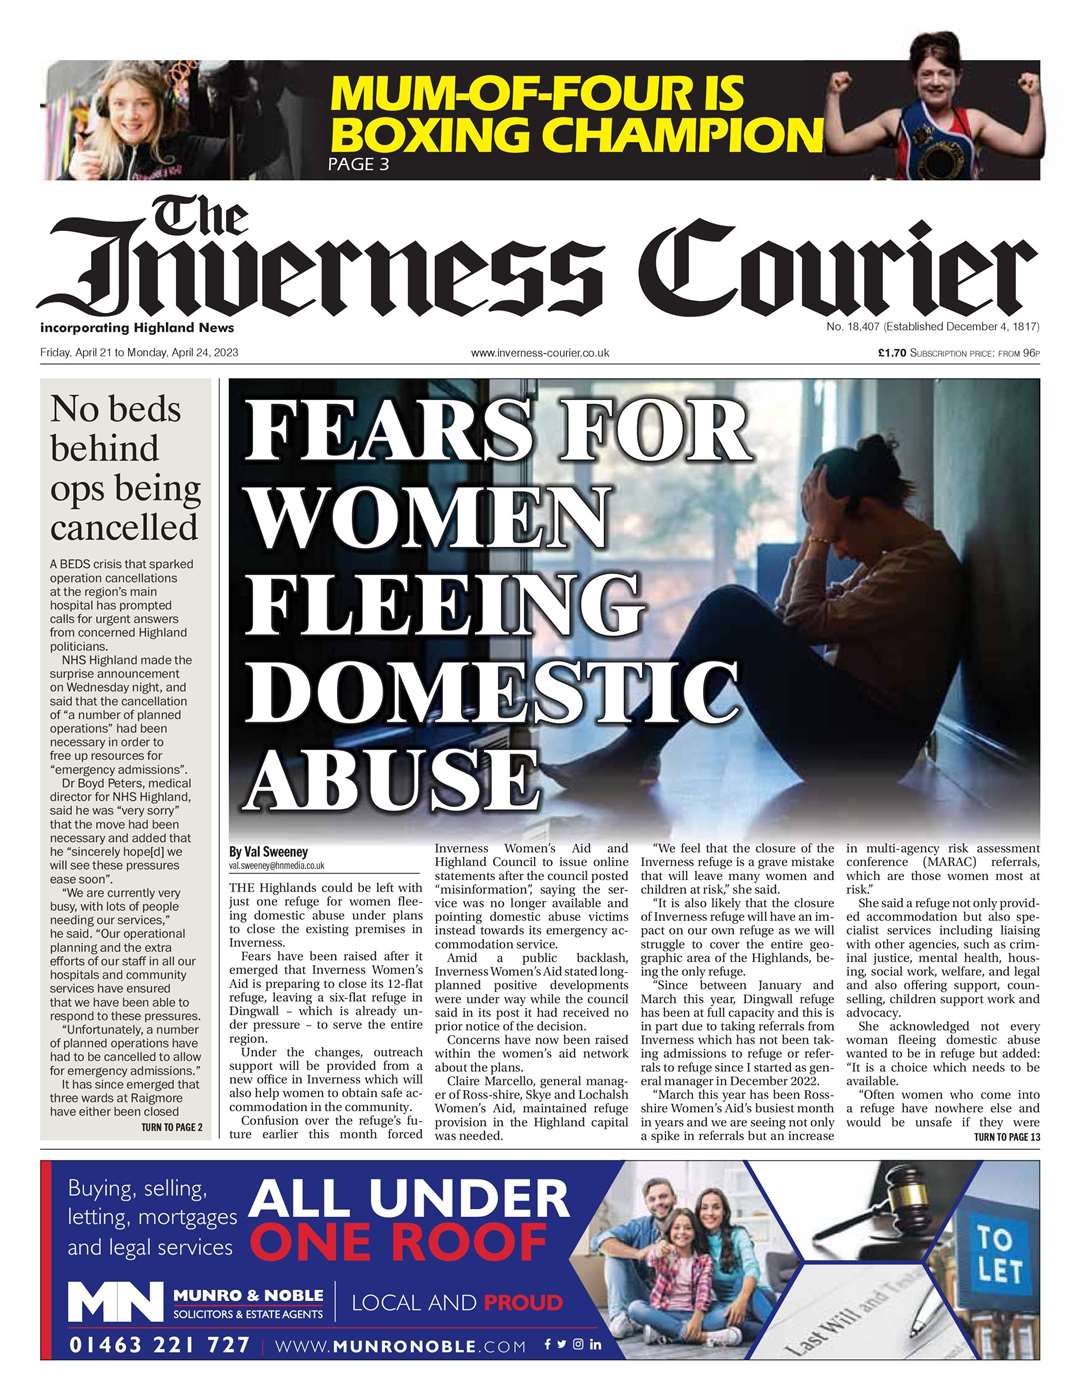 The Inverness Courier, April 21, front page.